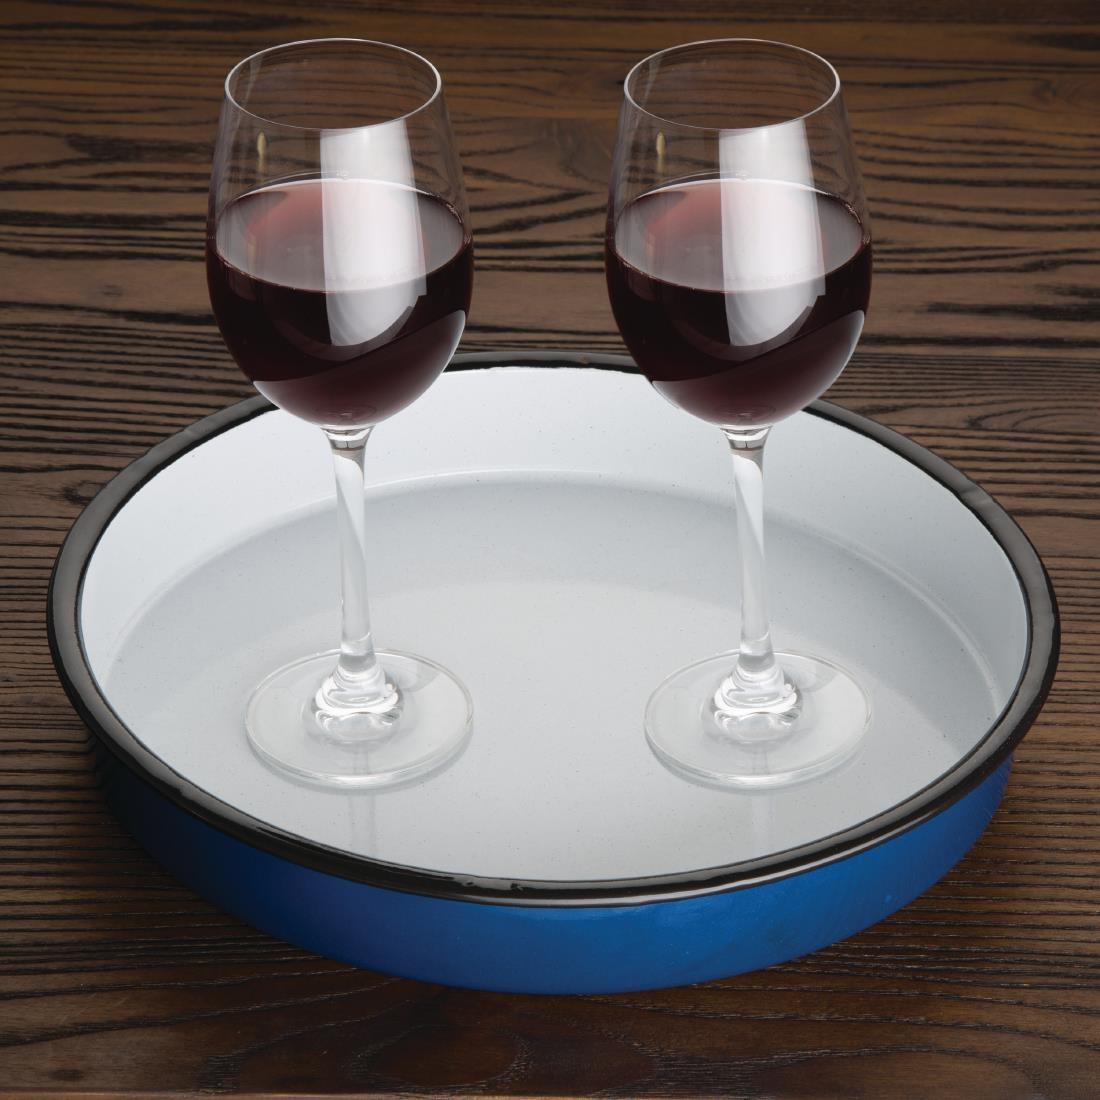 Olympia Enamelled Steel Round Service Tray 320mm - GM240  - 7